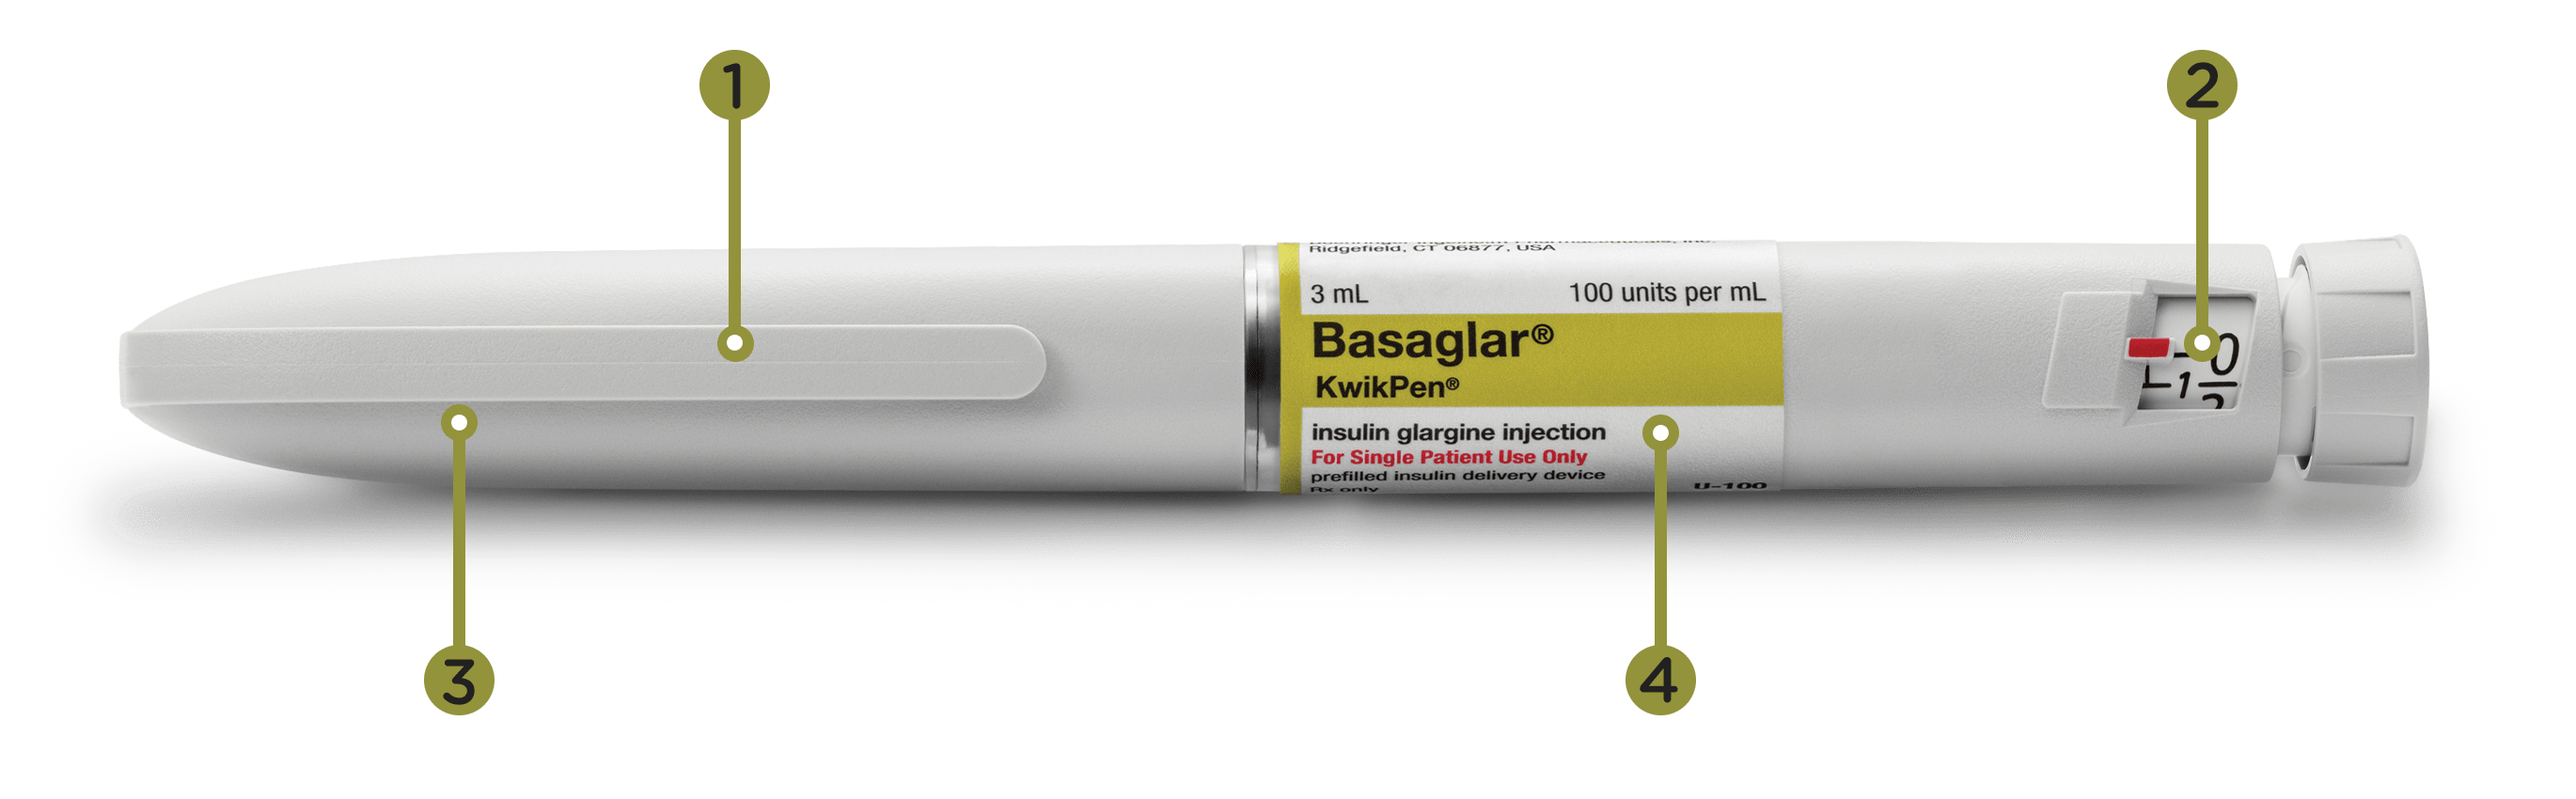 BASAGLAR (insulin glargine) injection 100 units/mL prefilled KwikPen® with information about product features